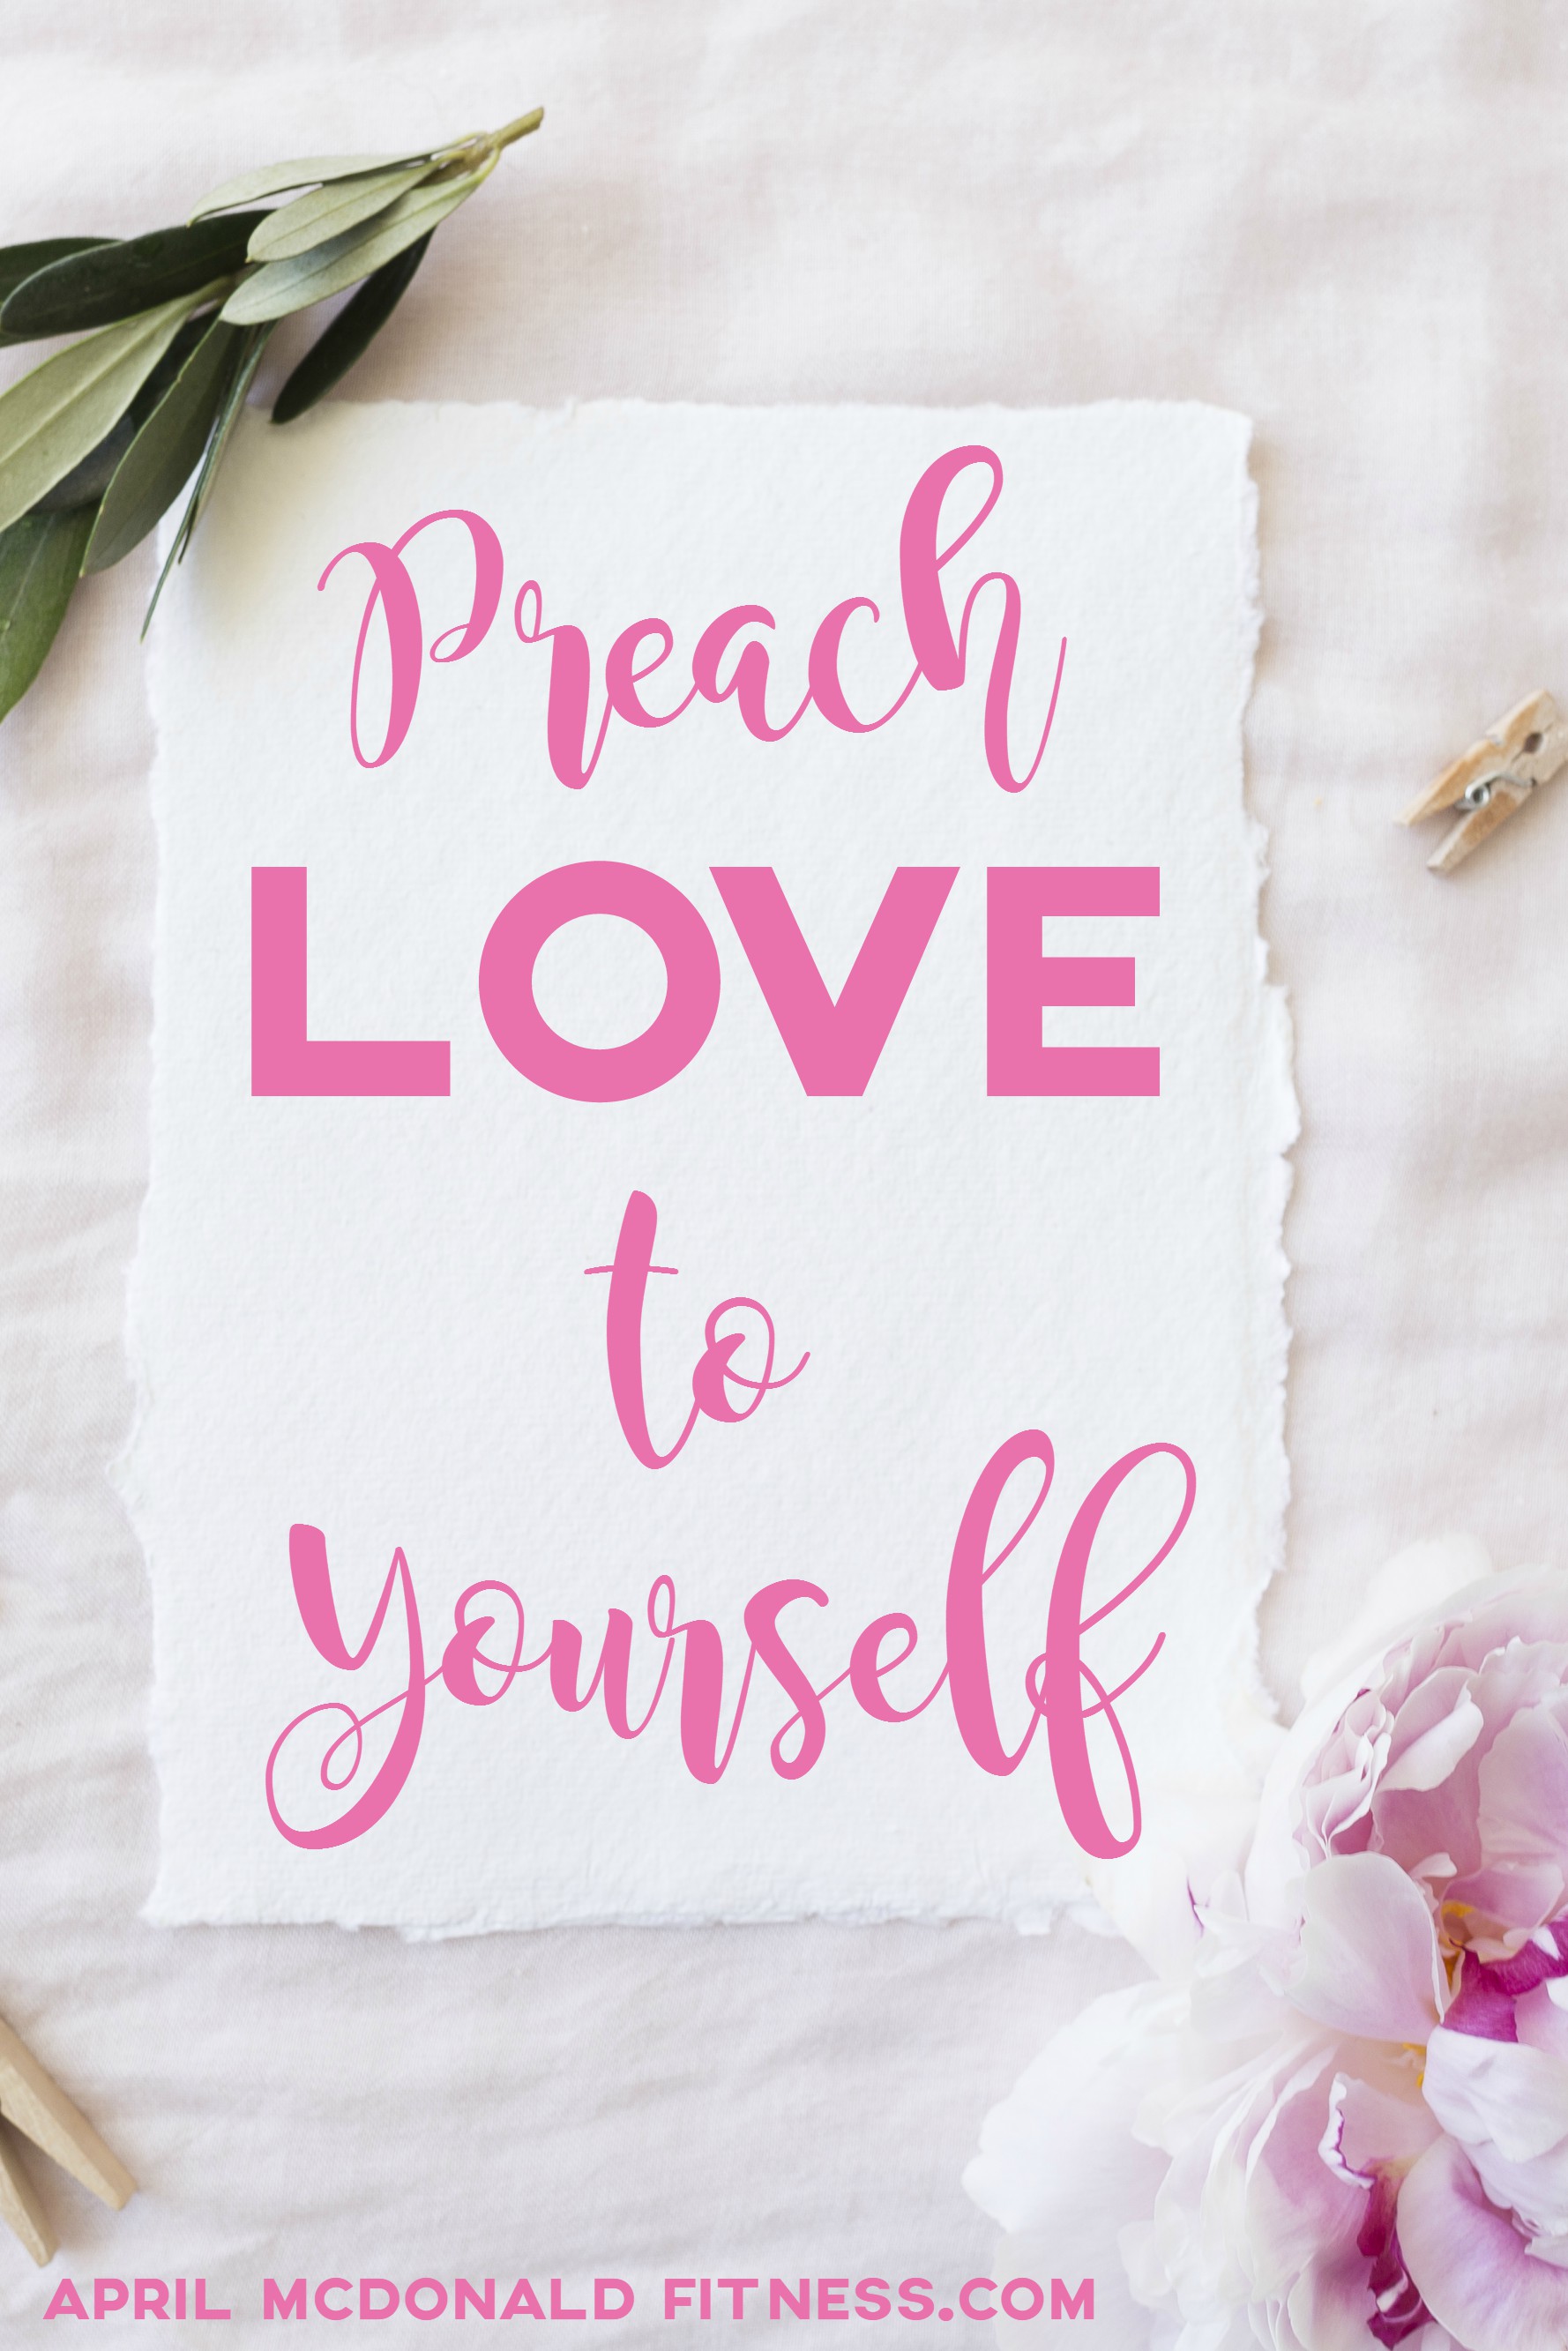  PREACH love to yourself and your loved ones